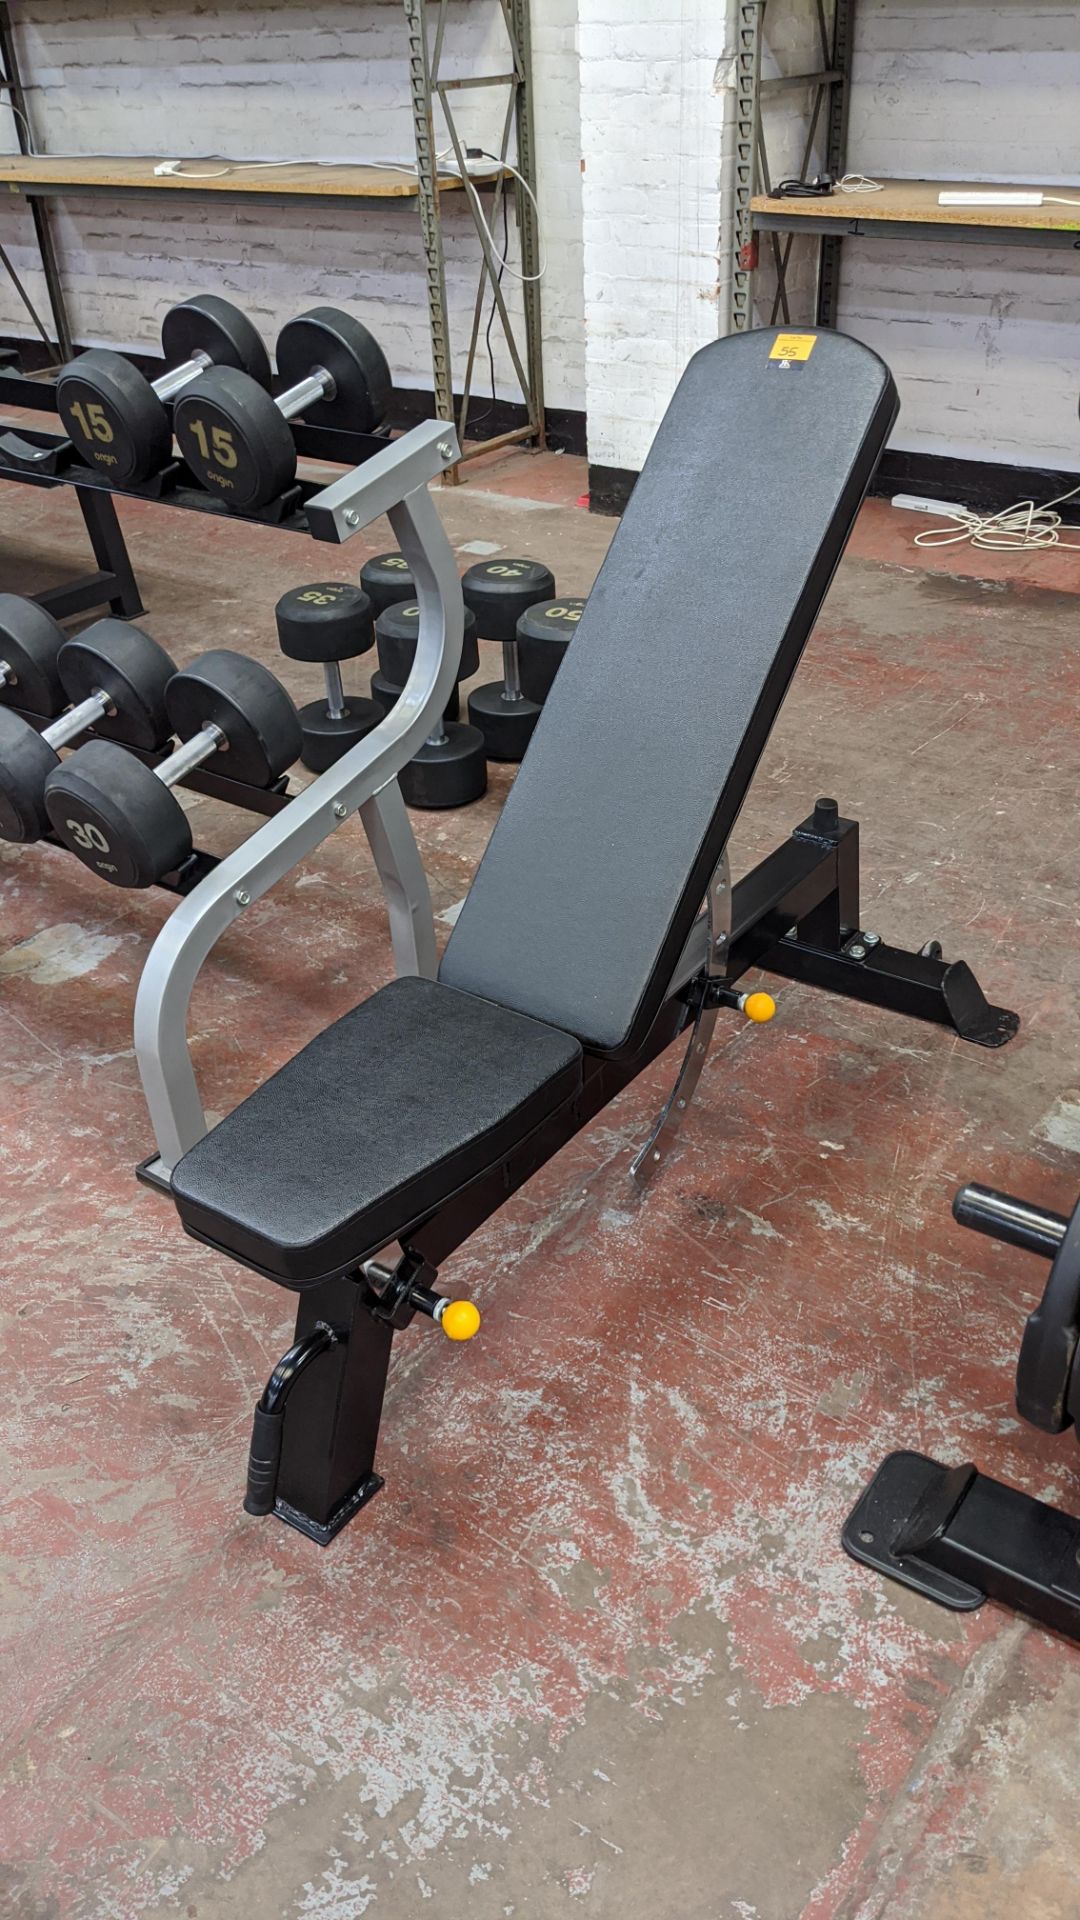 Gym Division multi-adjustable bench (V2) with wheels at back for easy moving. Cost price £249.99 pl - Image 2 of 7